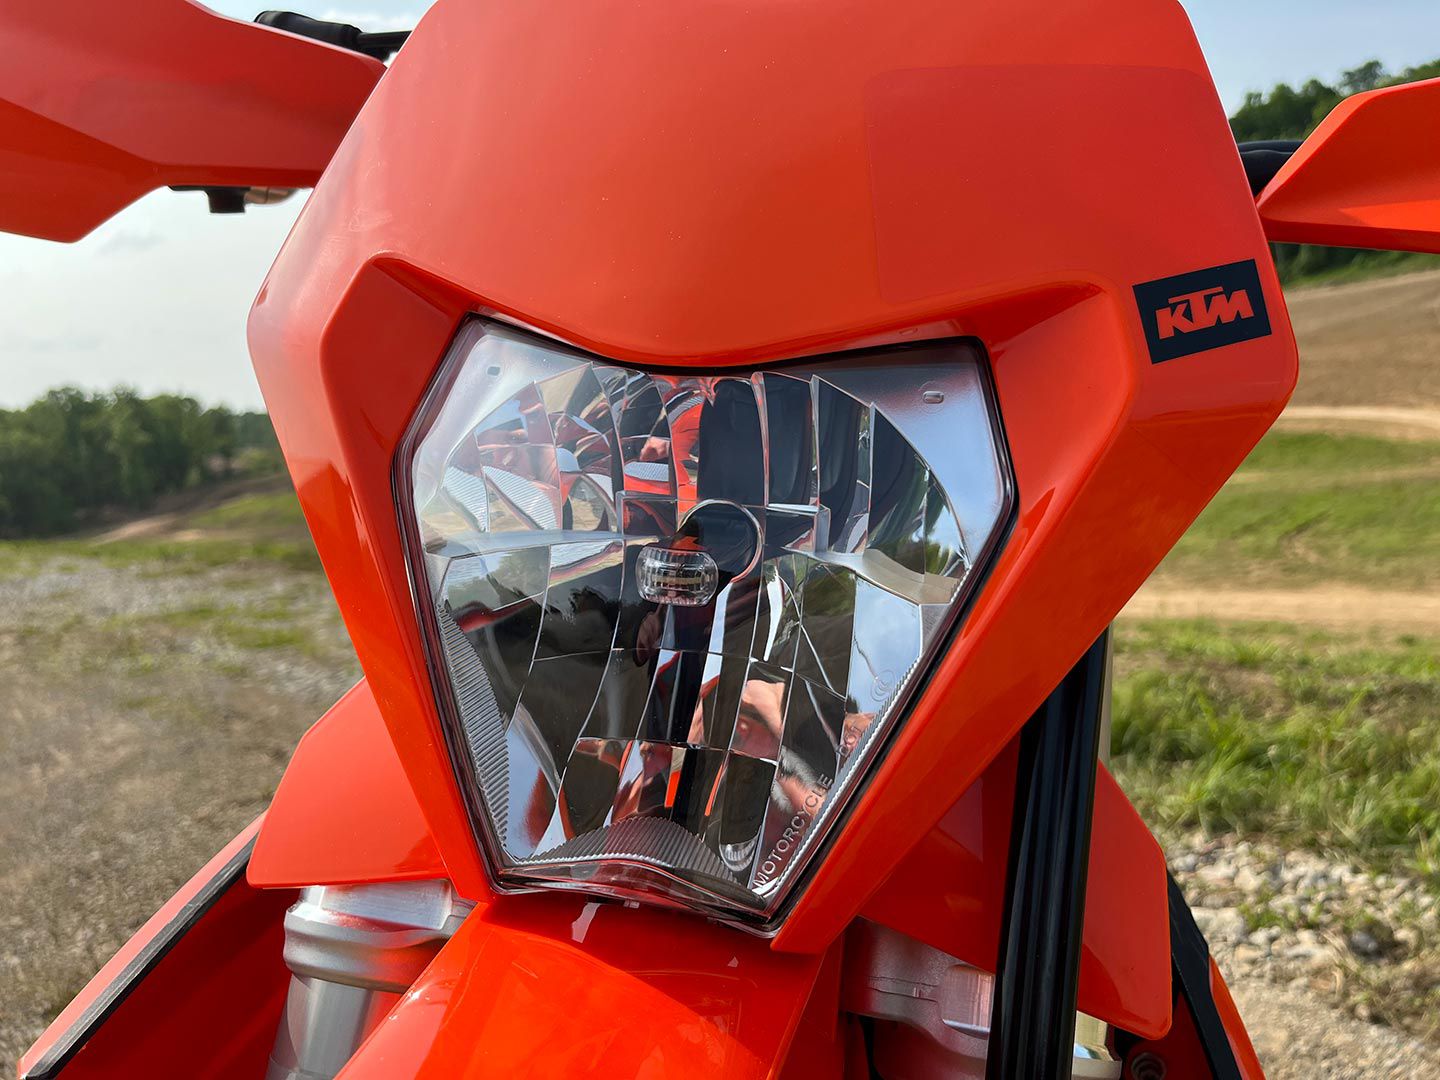 A new LED headlight is said to be 300 percent brighter and draw less power.